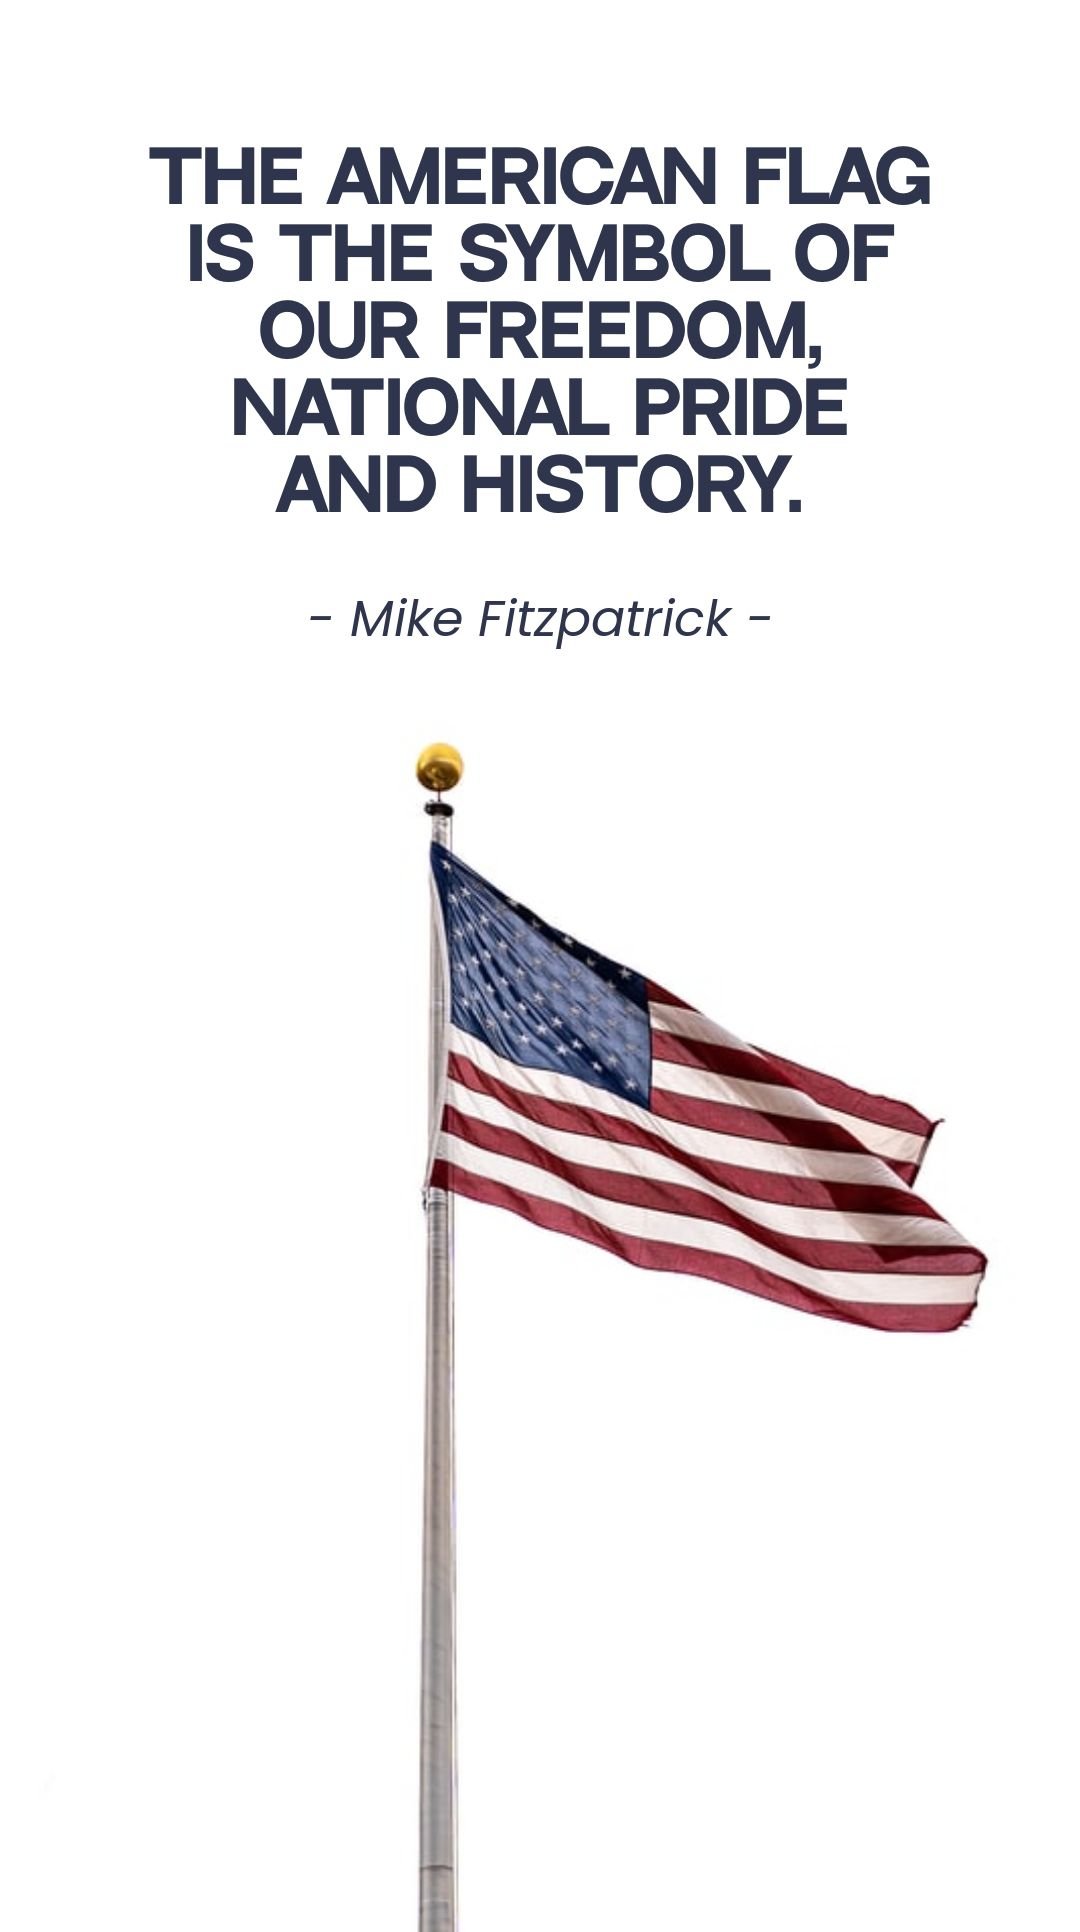 Mike Fitzpatrick - The American flag is the symbol of our freedom, national pride and history.